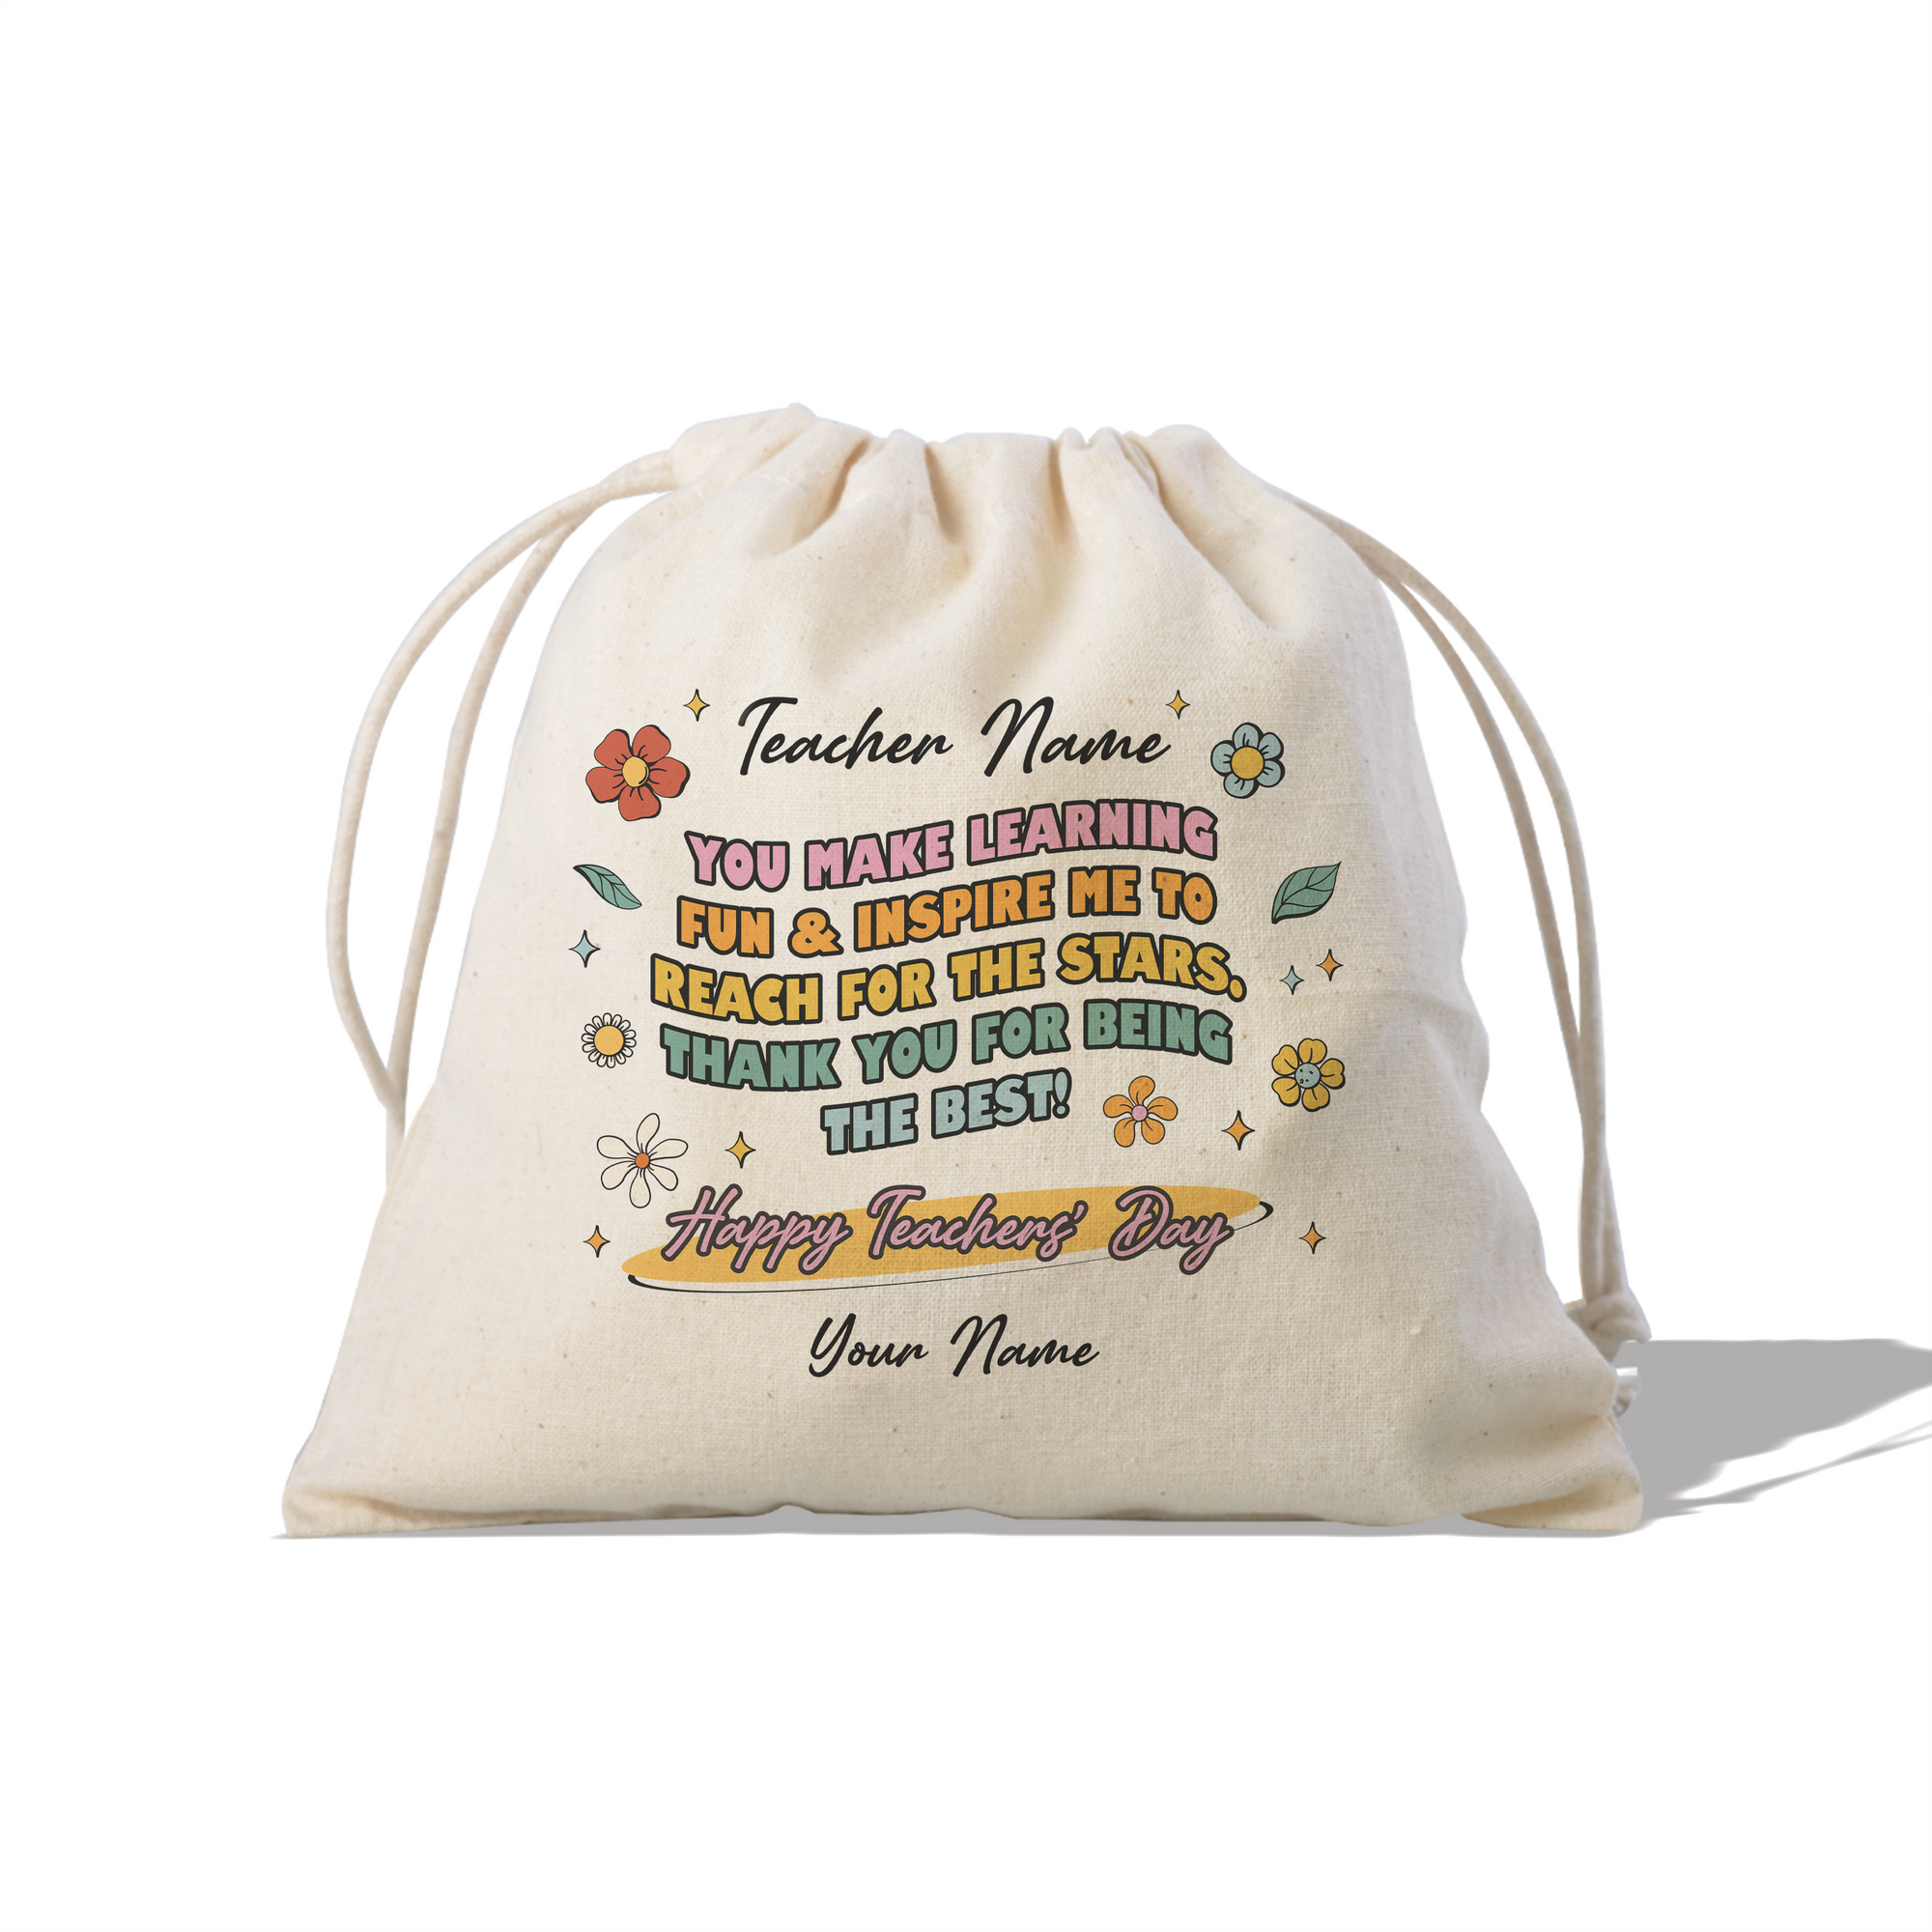 Reach for The Stars Quote Satchel